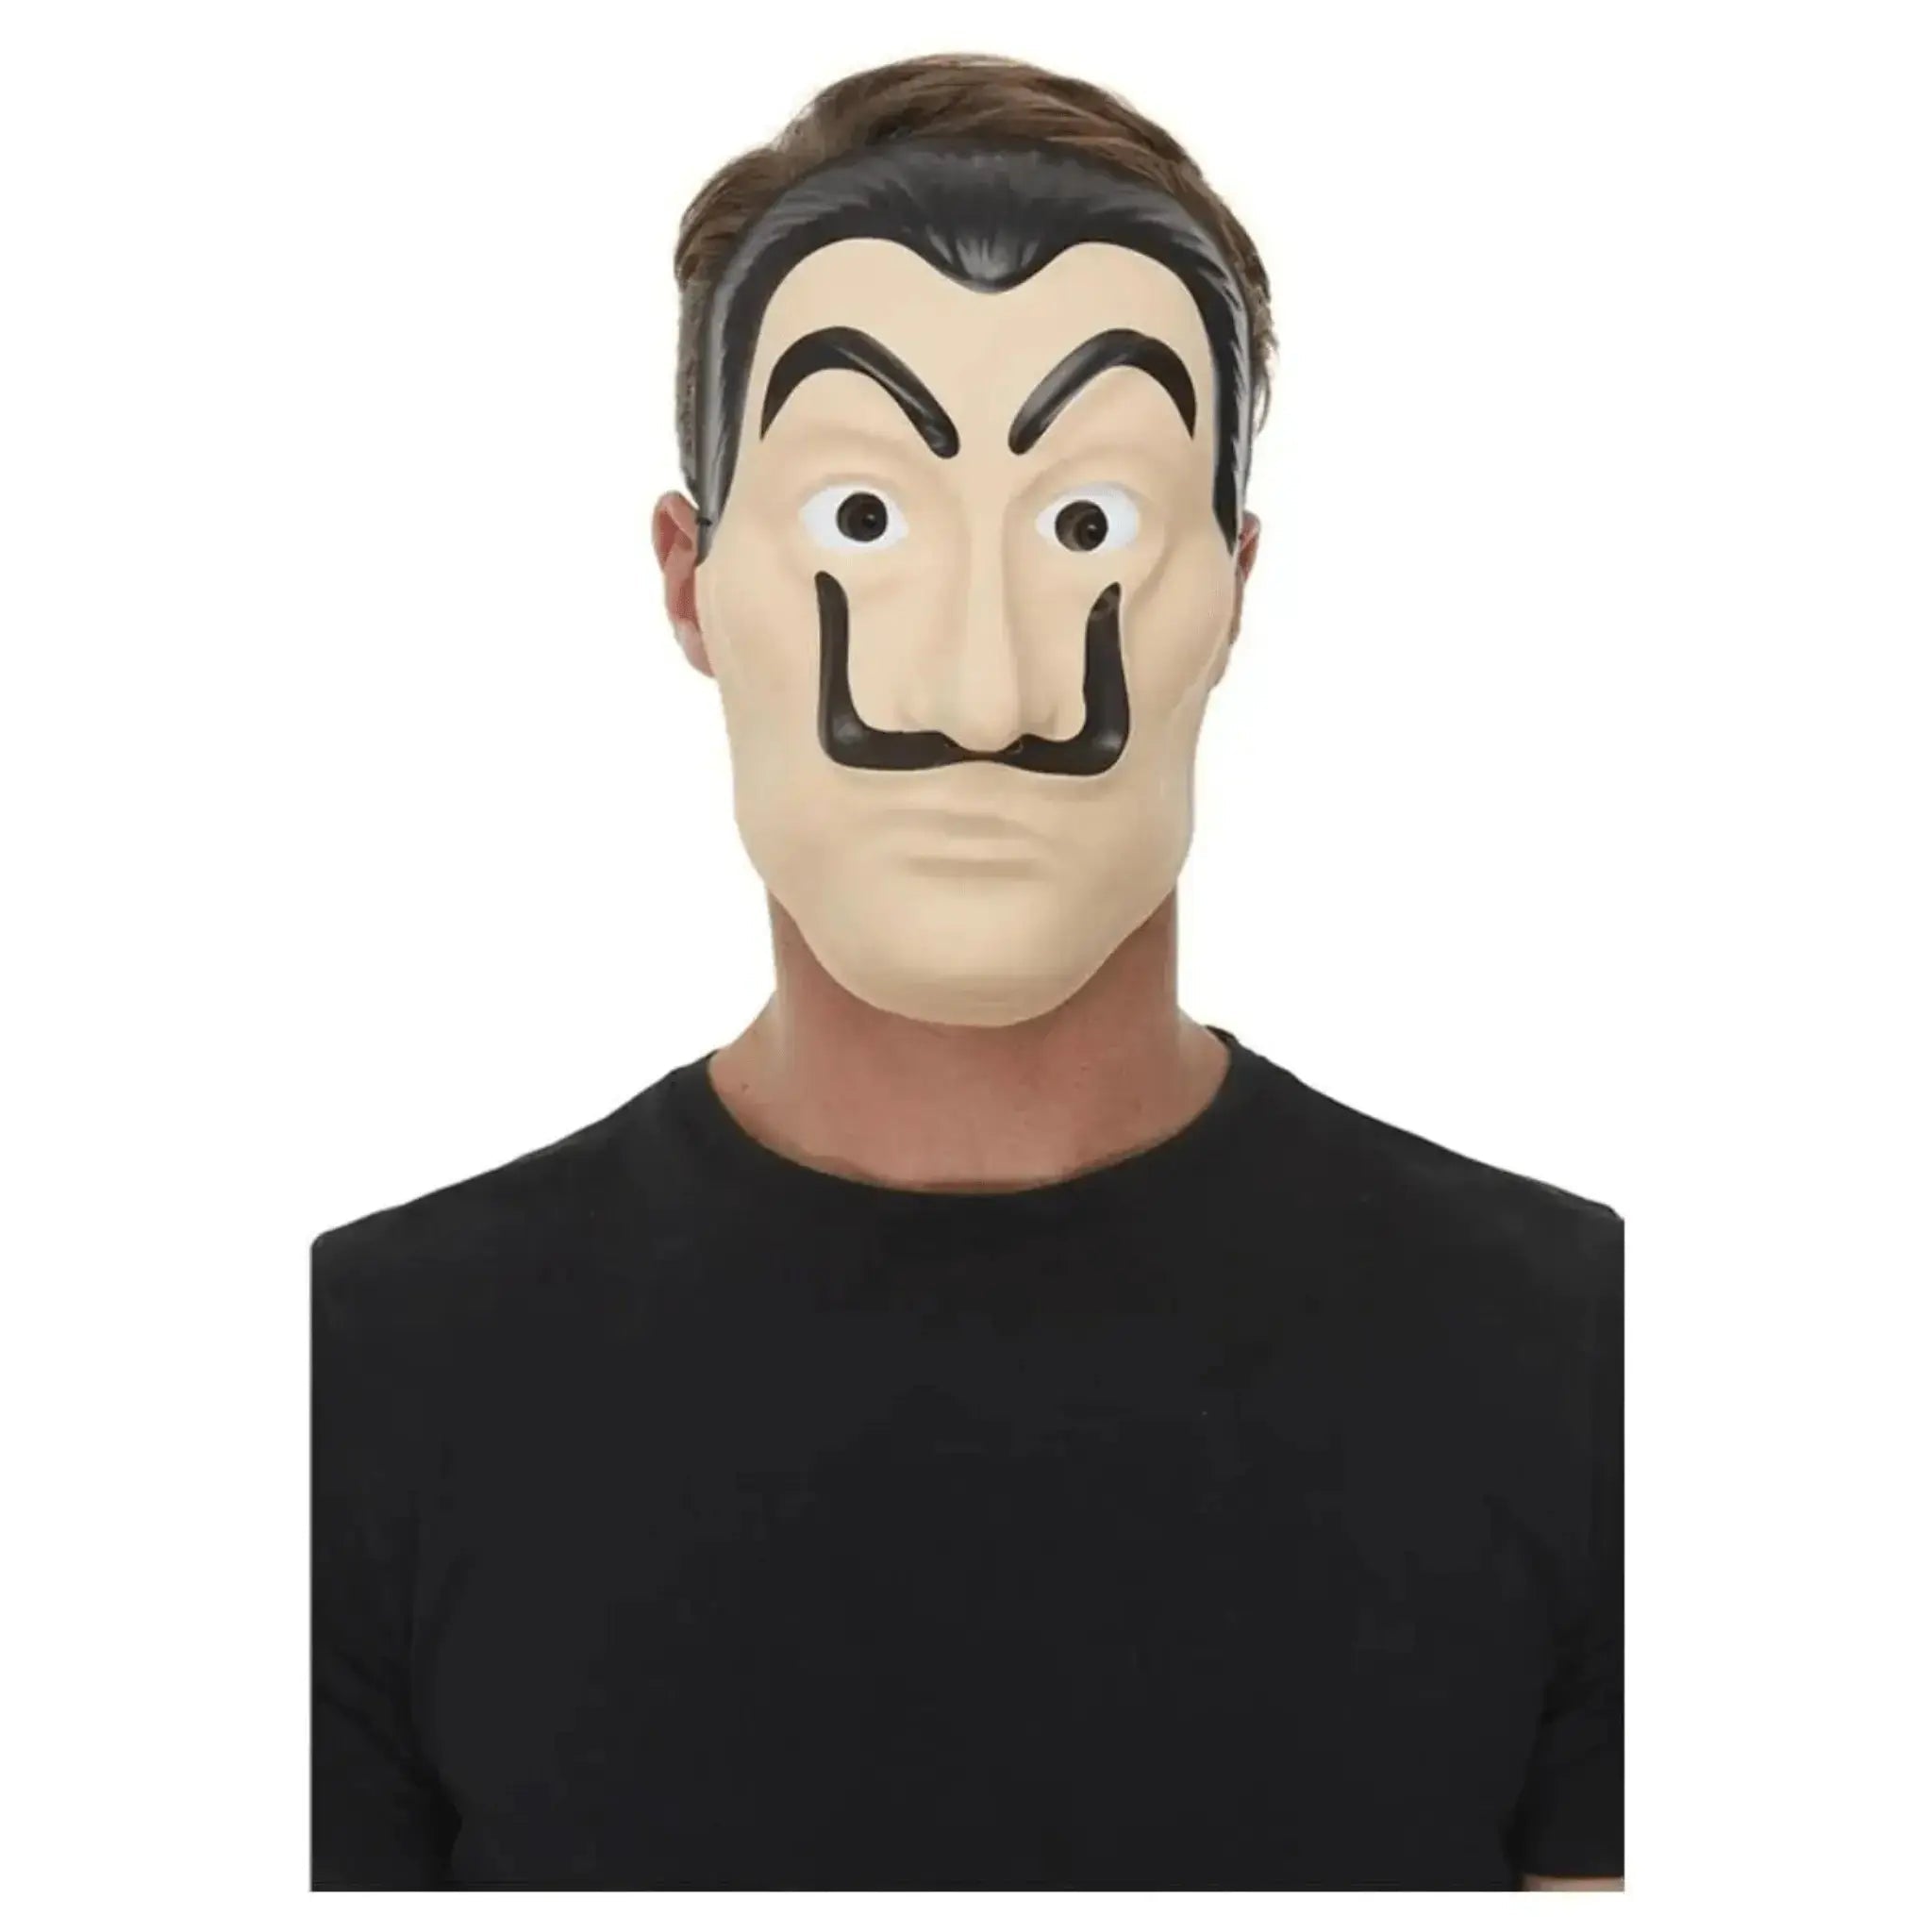 Surreal Artist/Bank Robber Mask | The Party Hut